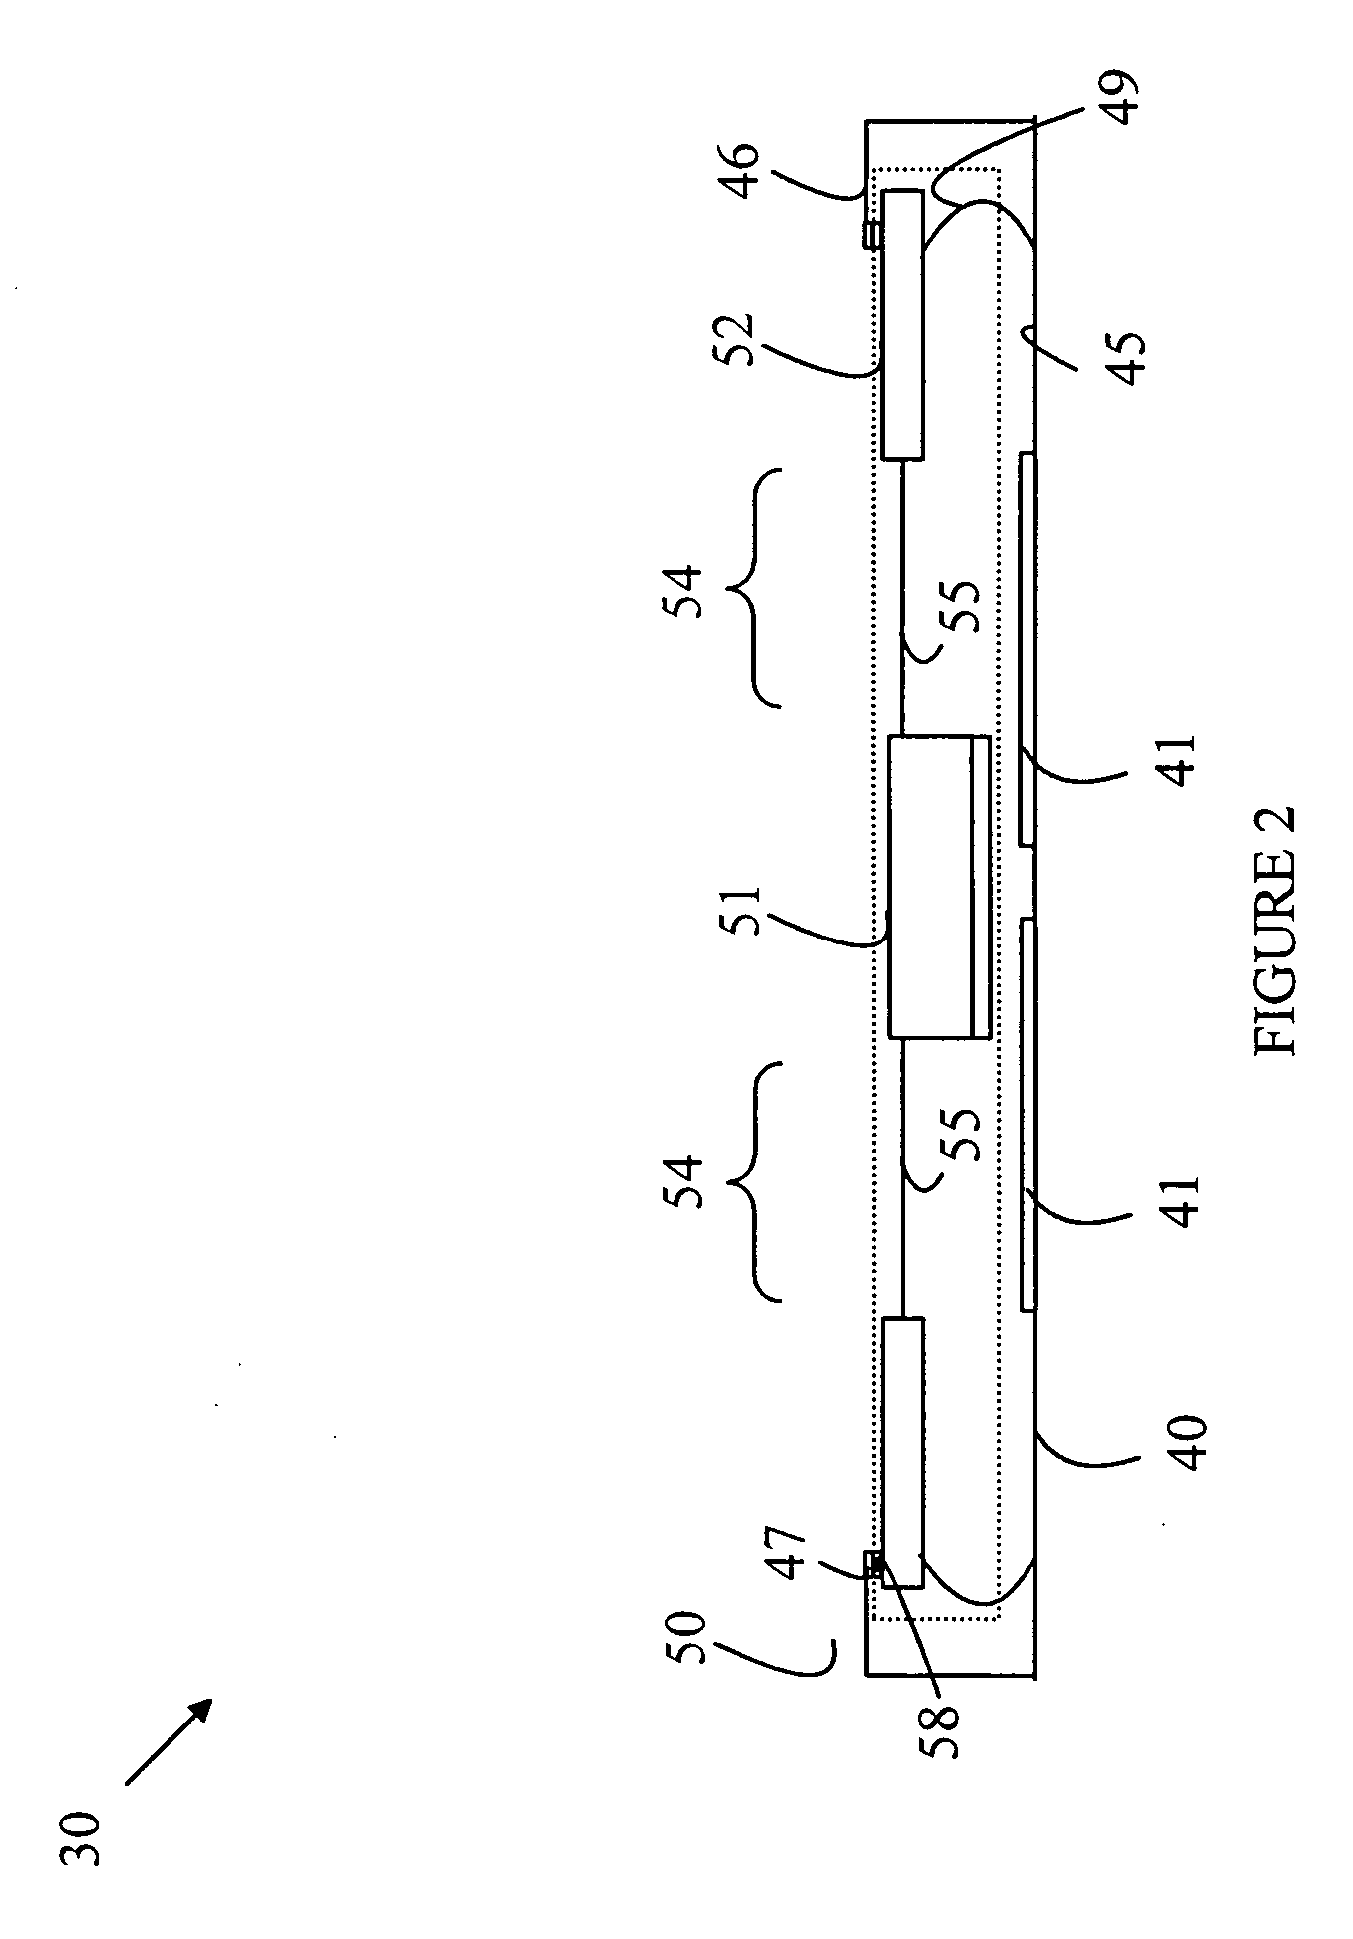 Modular assembly for a self-indexing computer pointing device